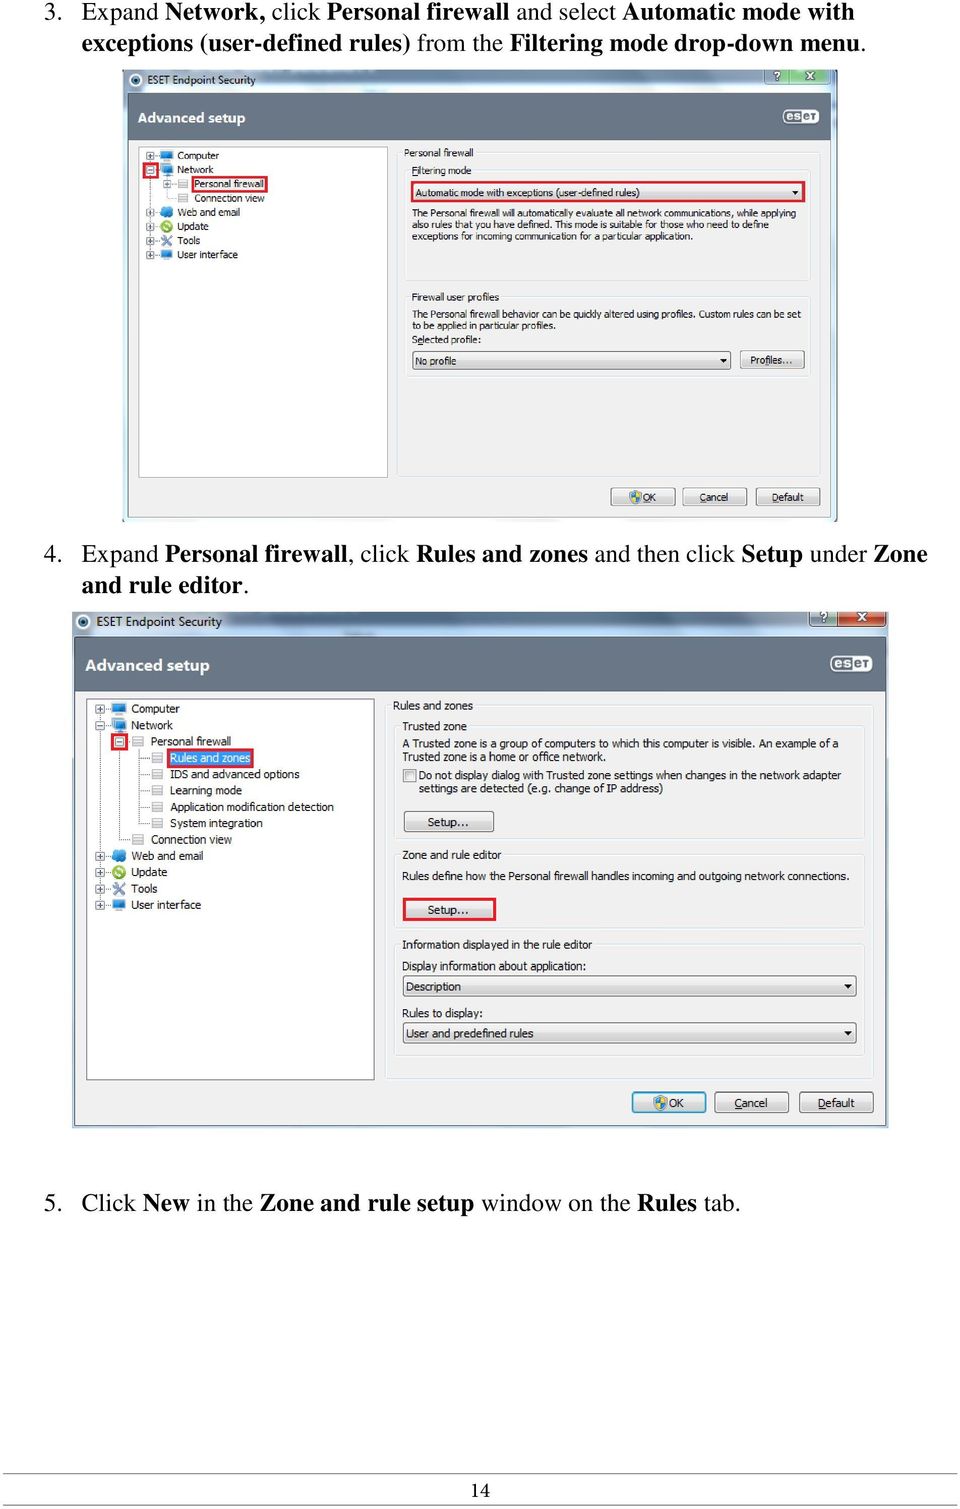 Expand Personal firewall, click Rules and zones and then click Setup under